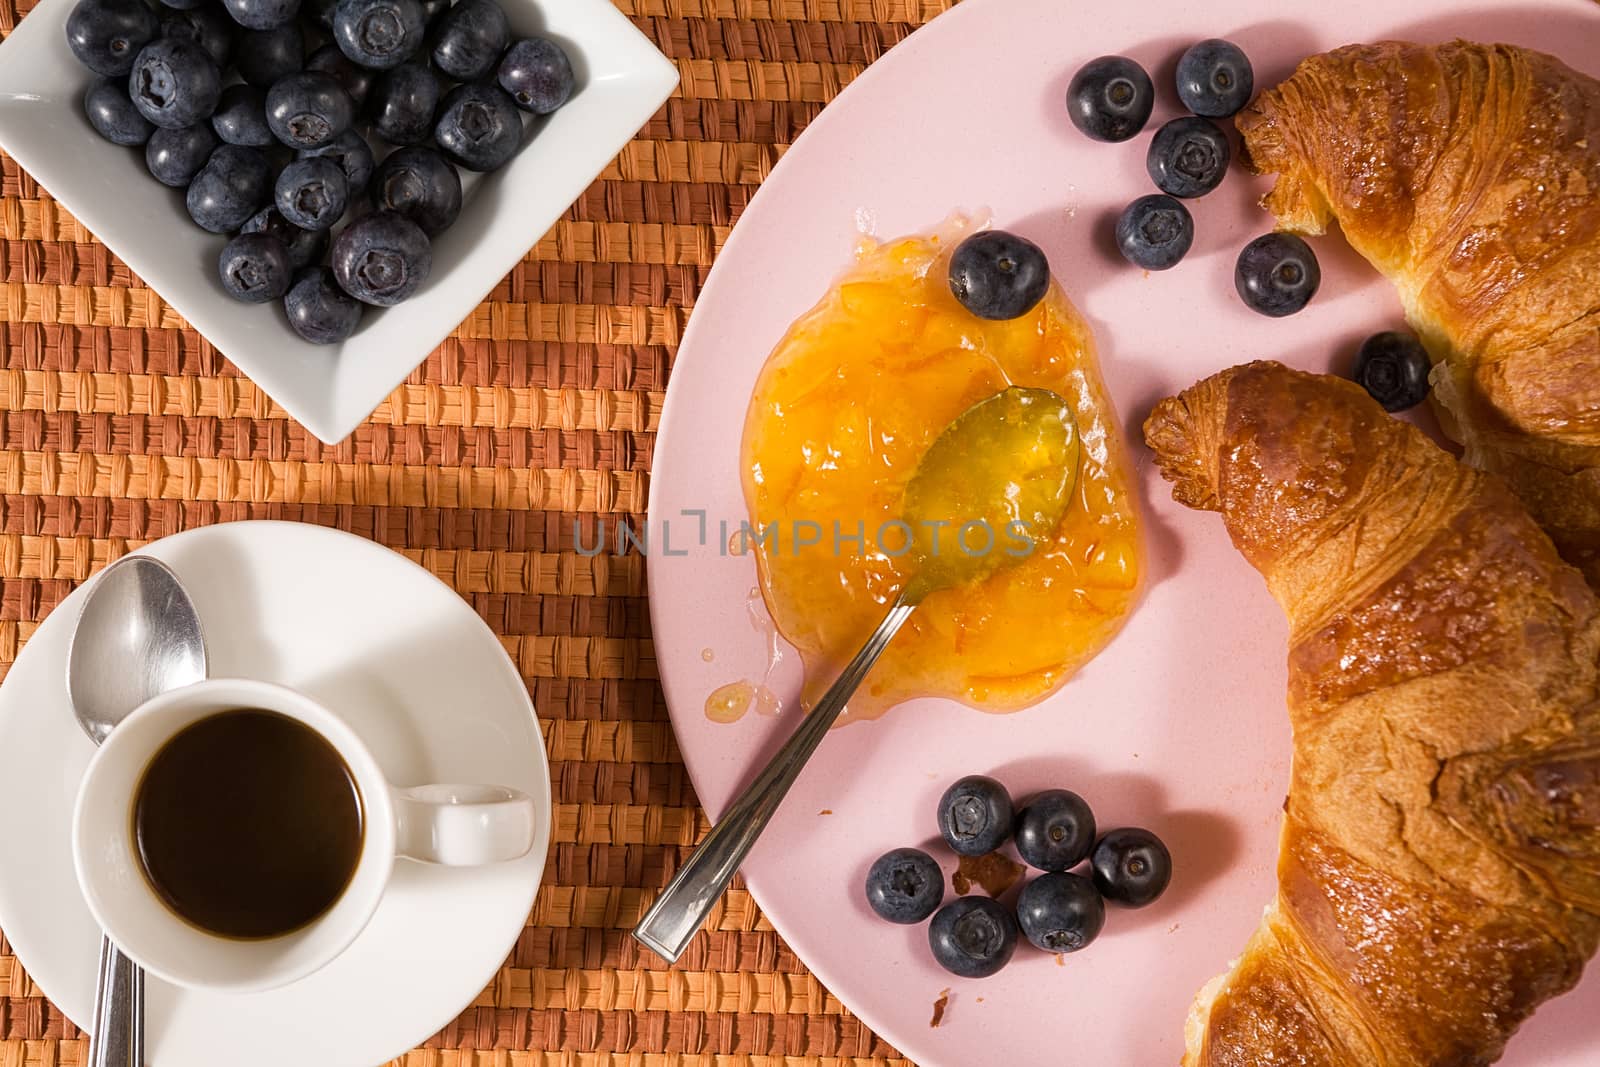 Closeup of croissant, blueberries, coffee and orange jam over a tablecloth seen from above